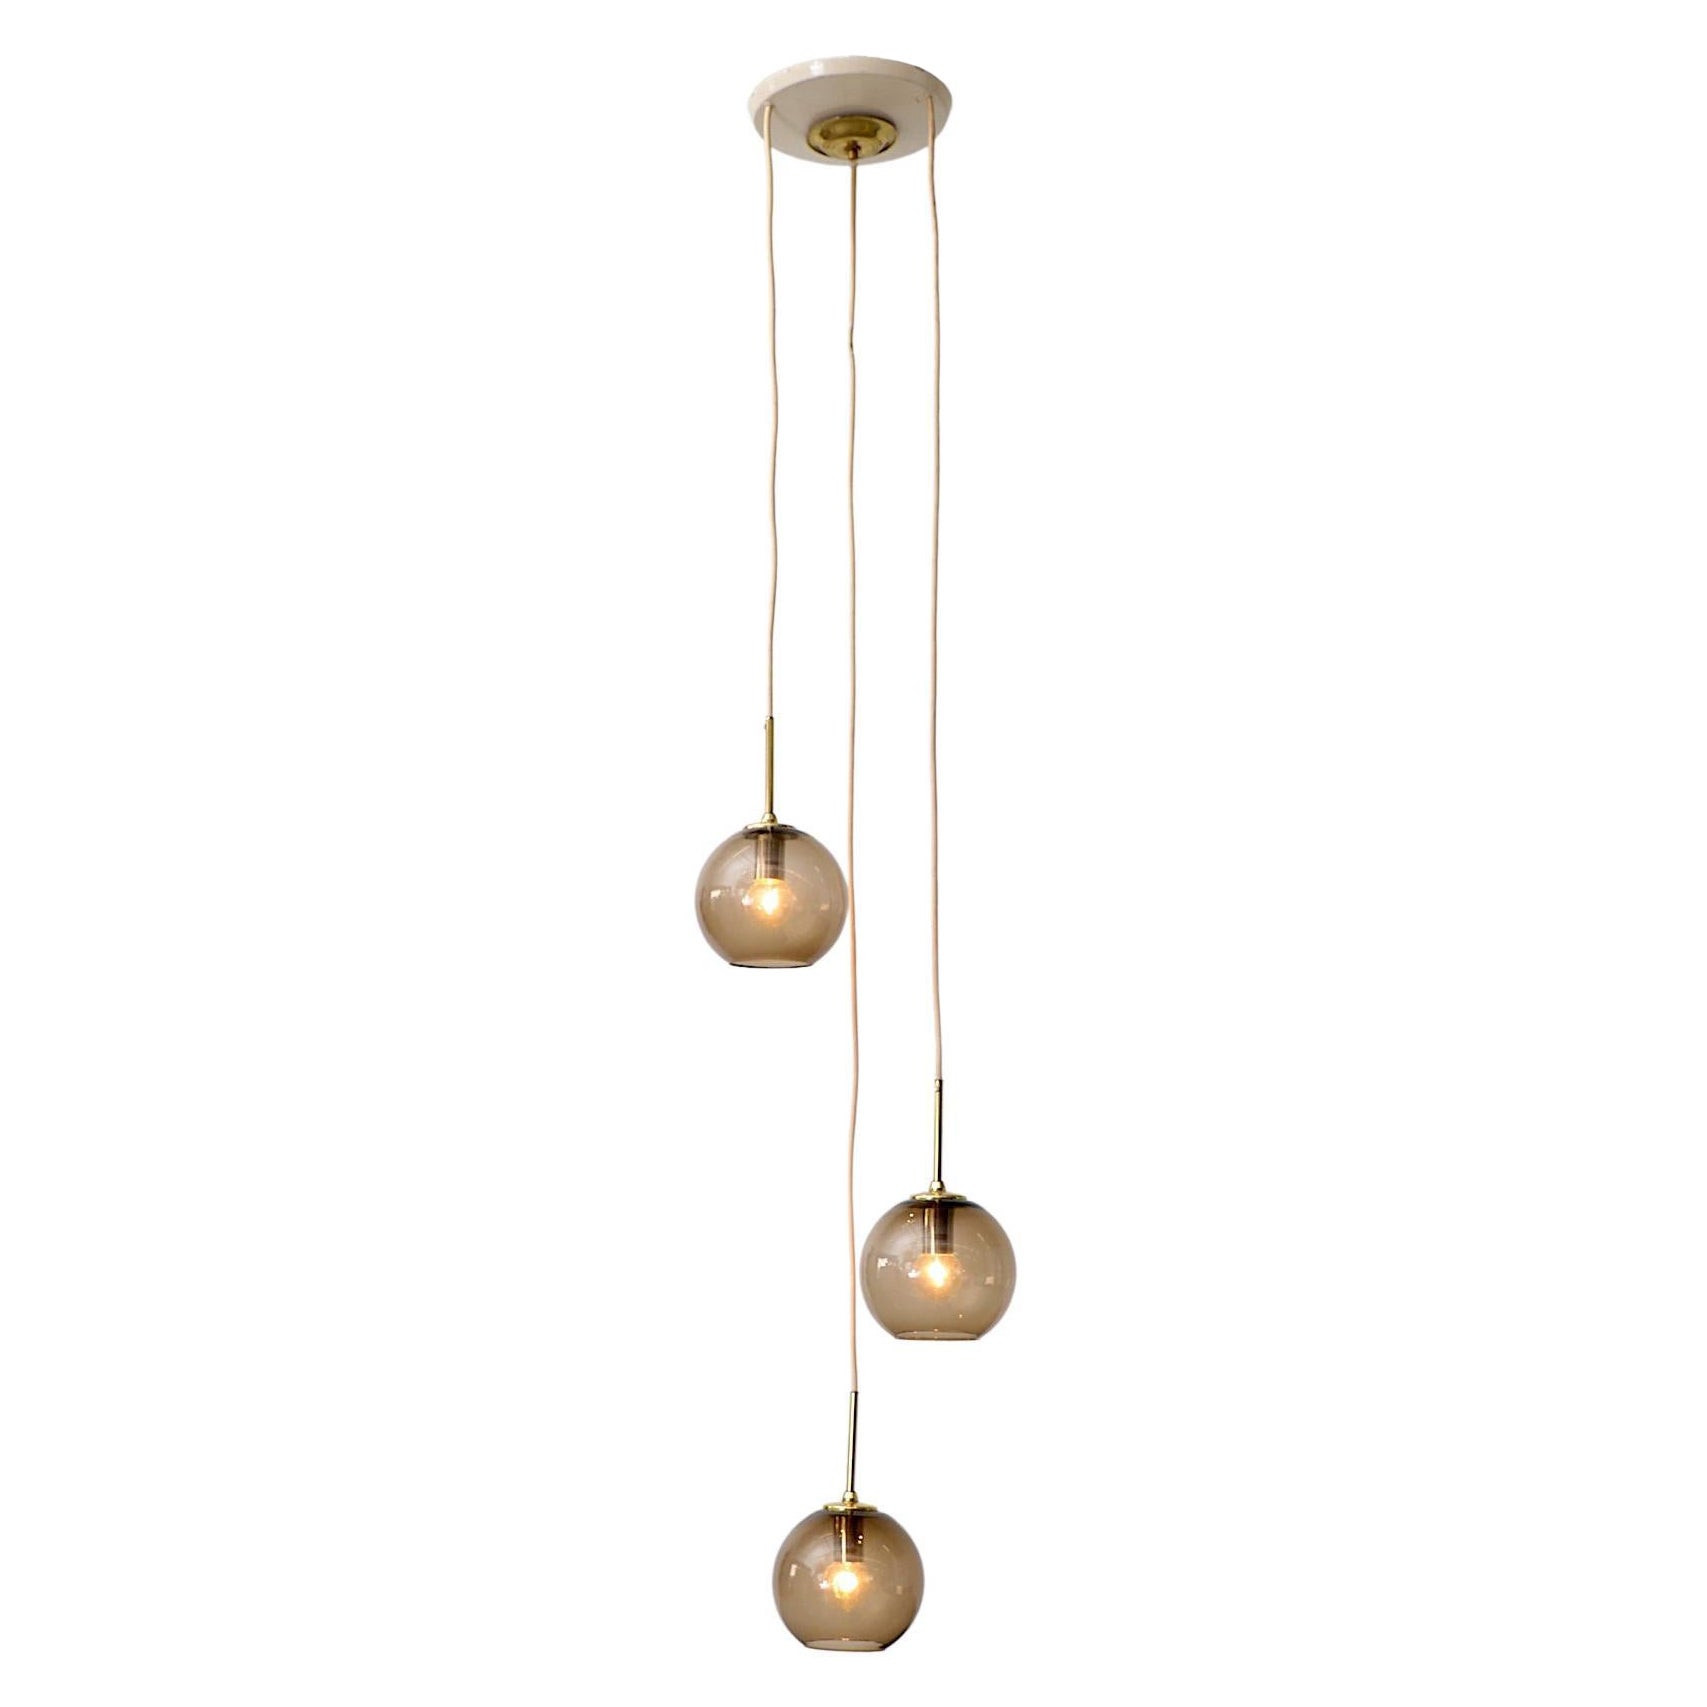 1970s Chandelier with 3 Smoked Glass Globes, Brass Hardware and Triple Canopy